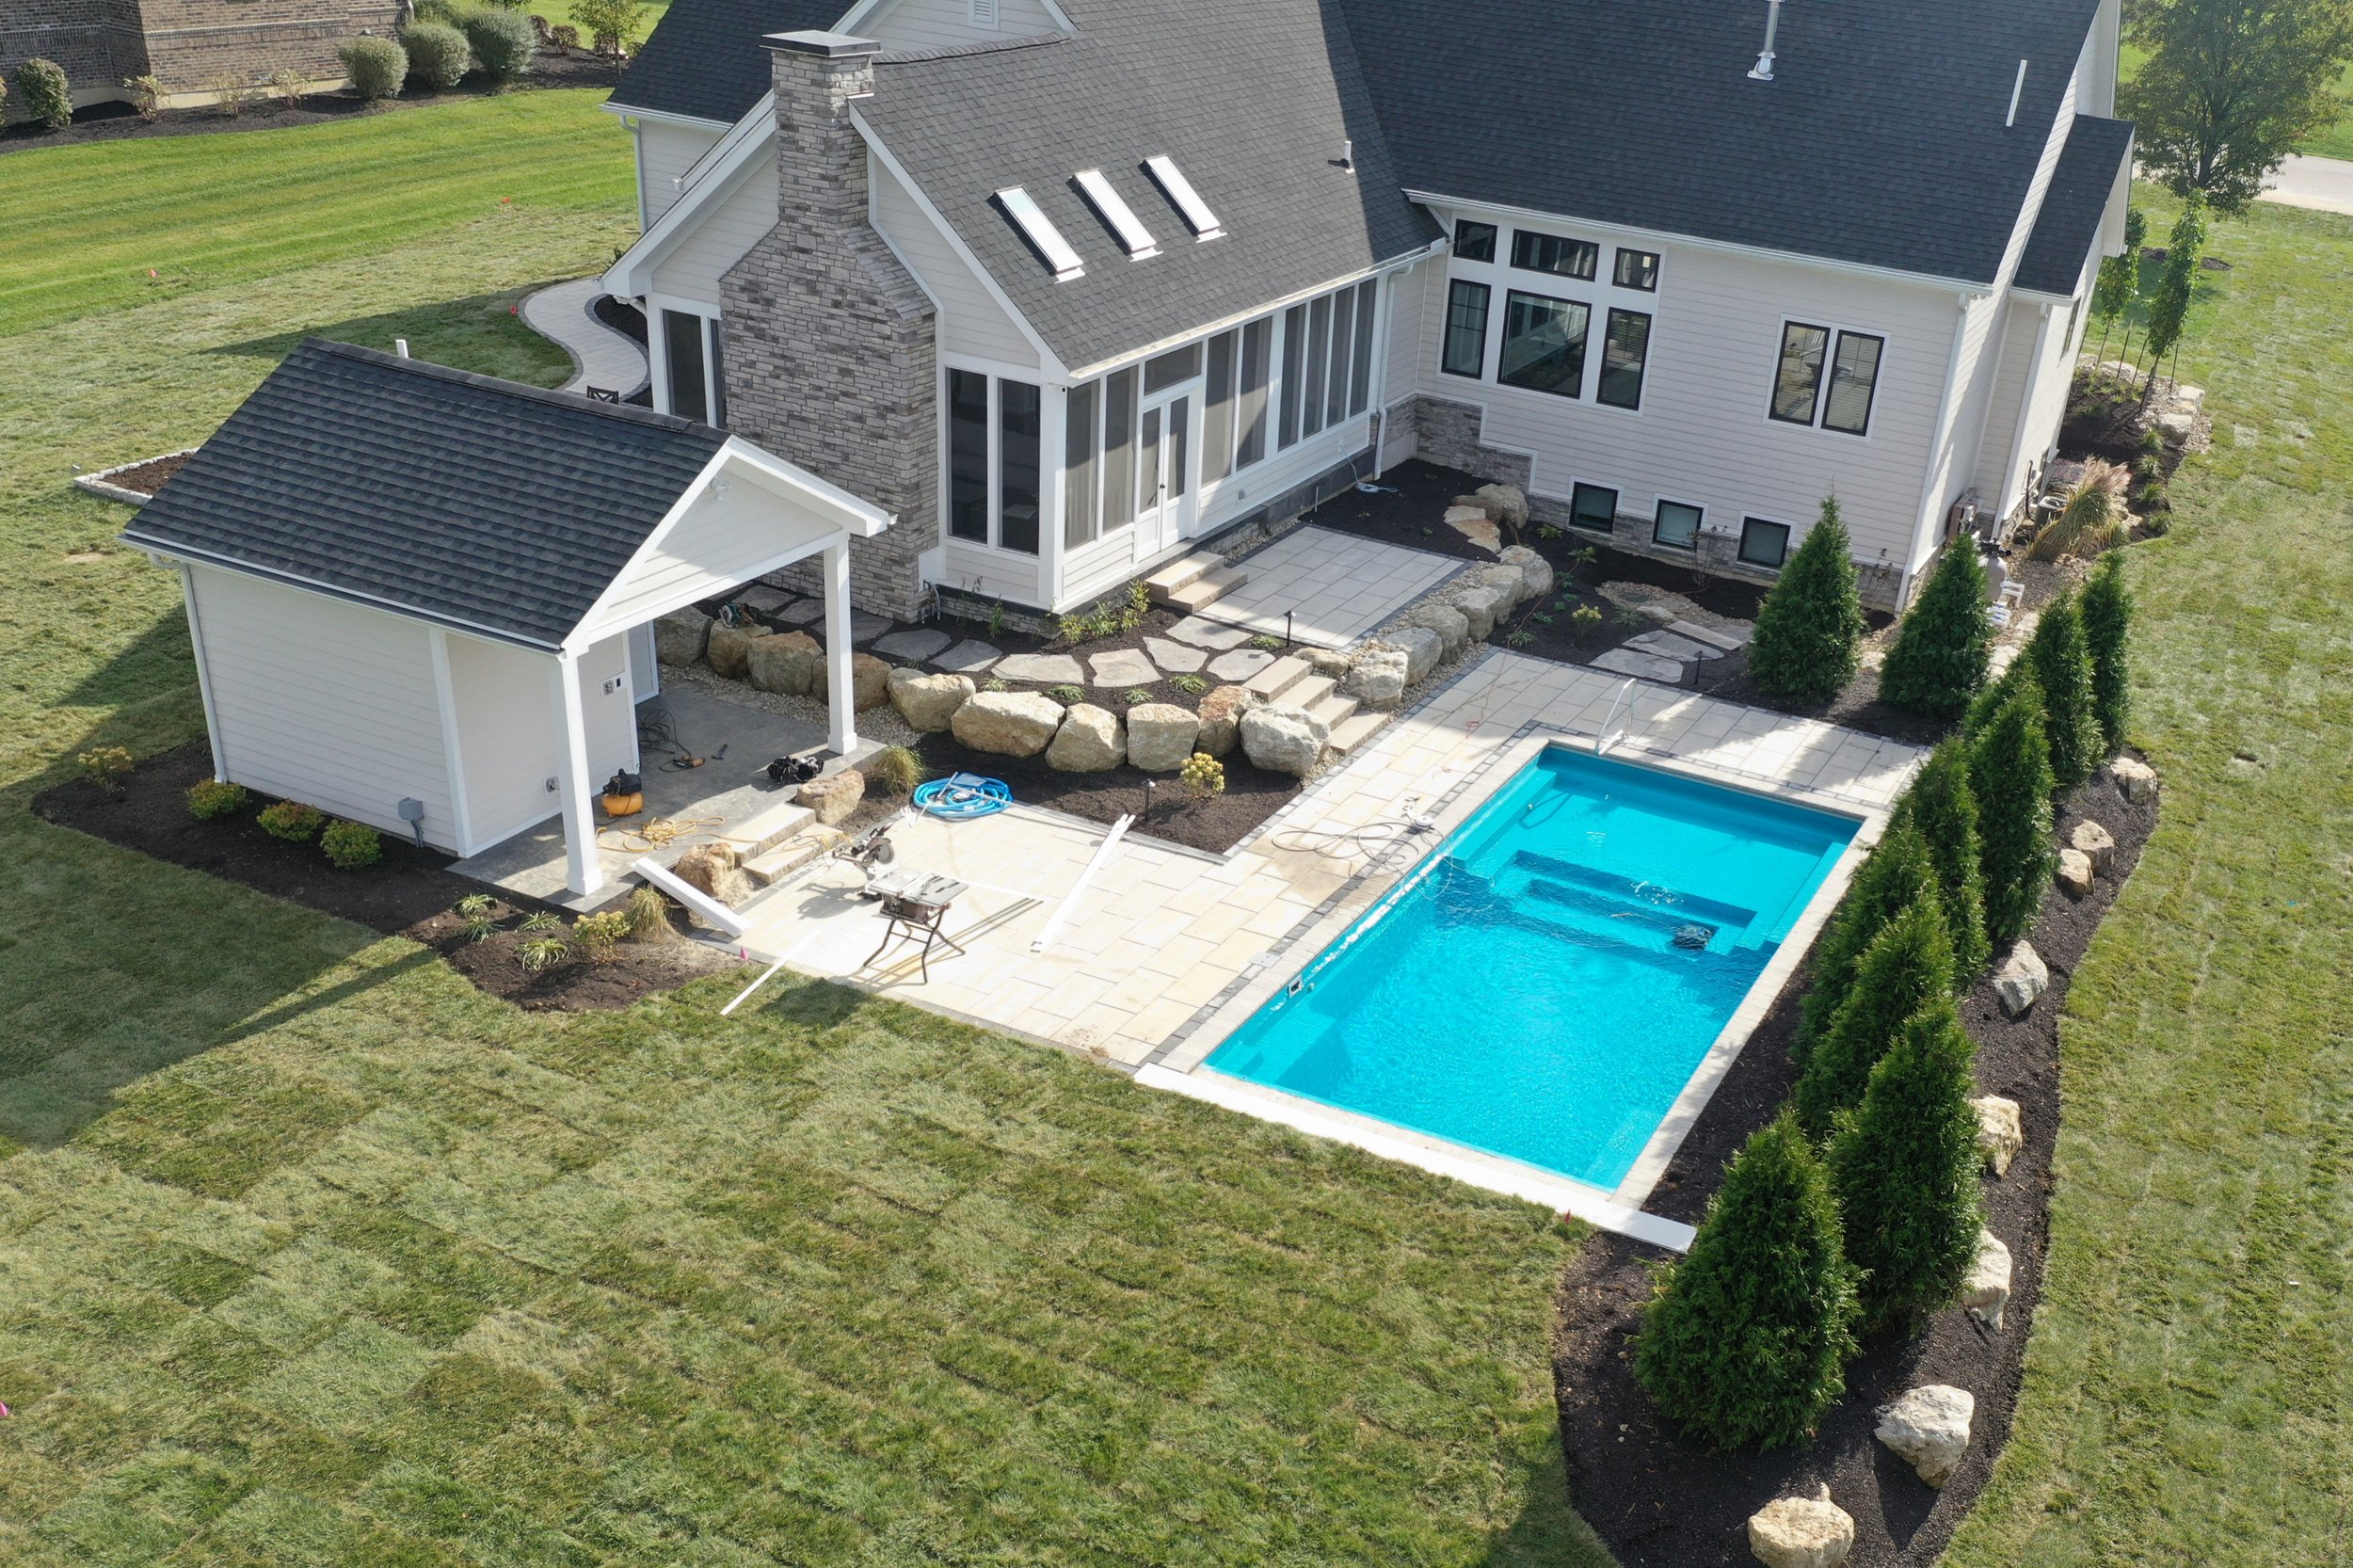 Private Pool with Paver Patio and Landscaping